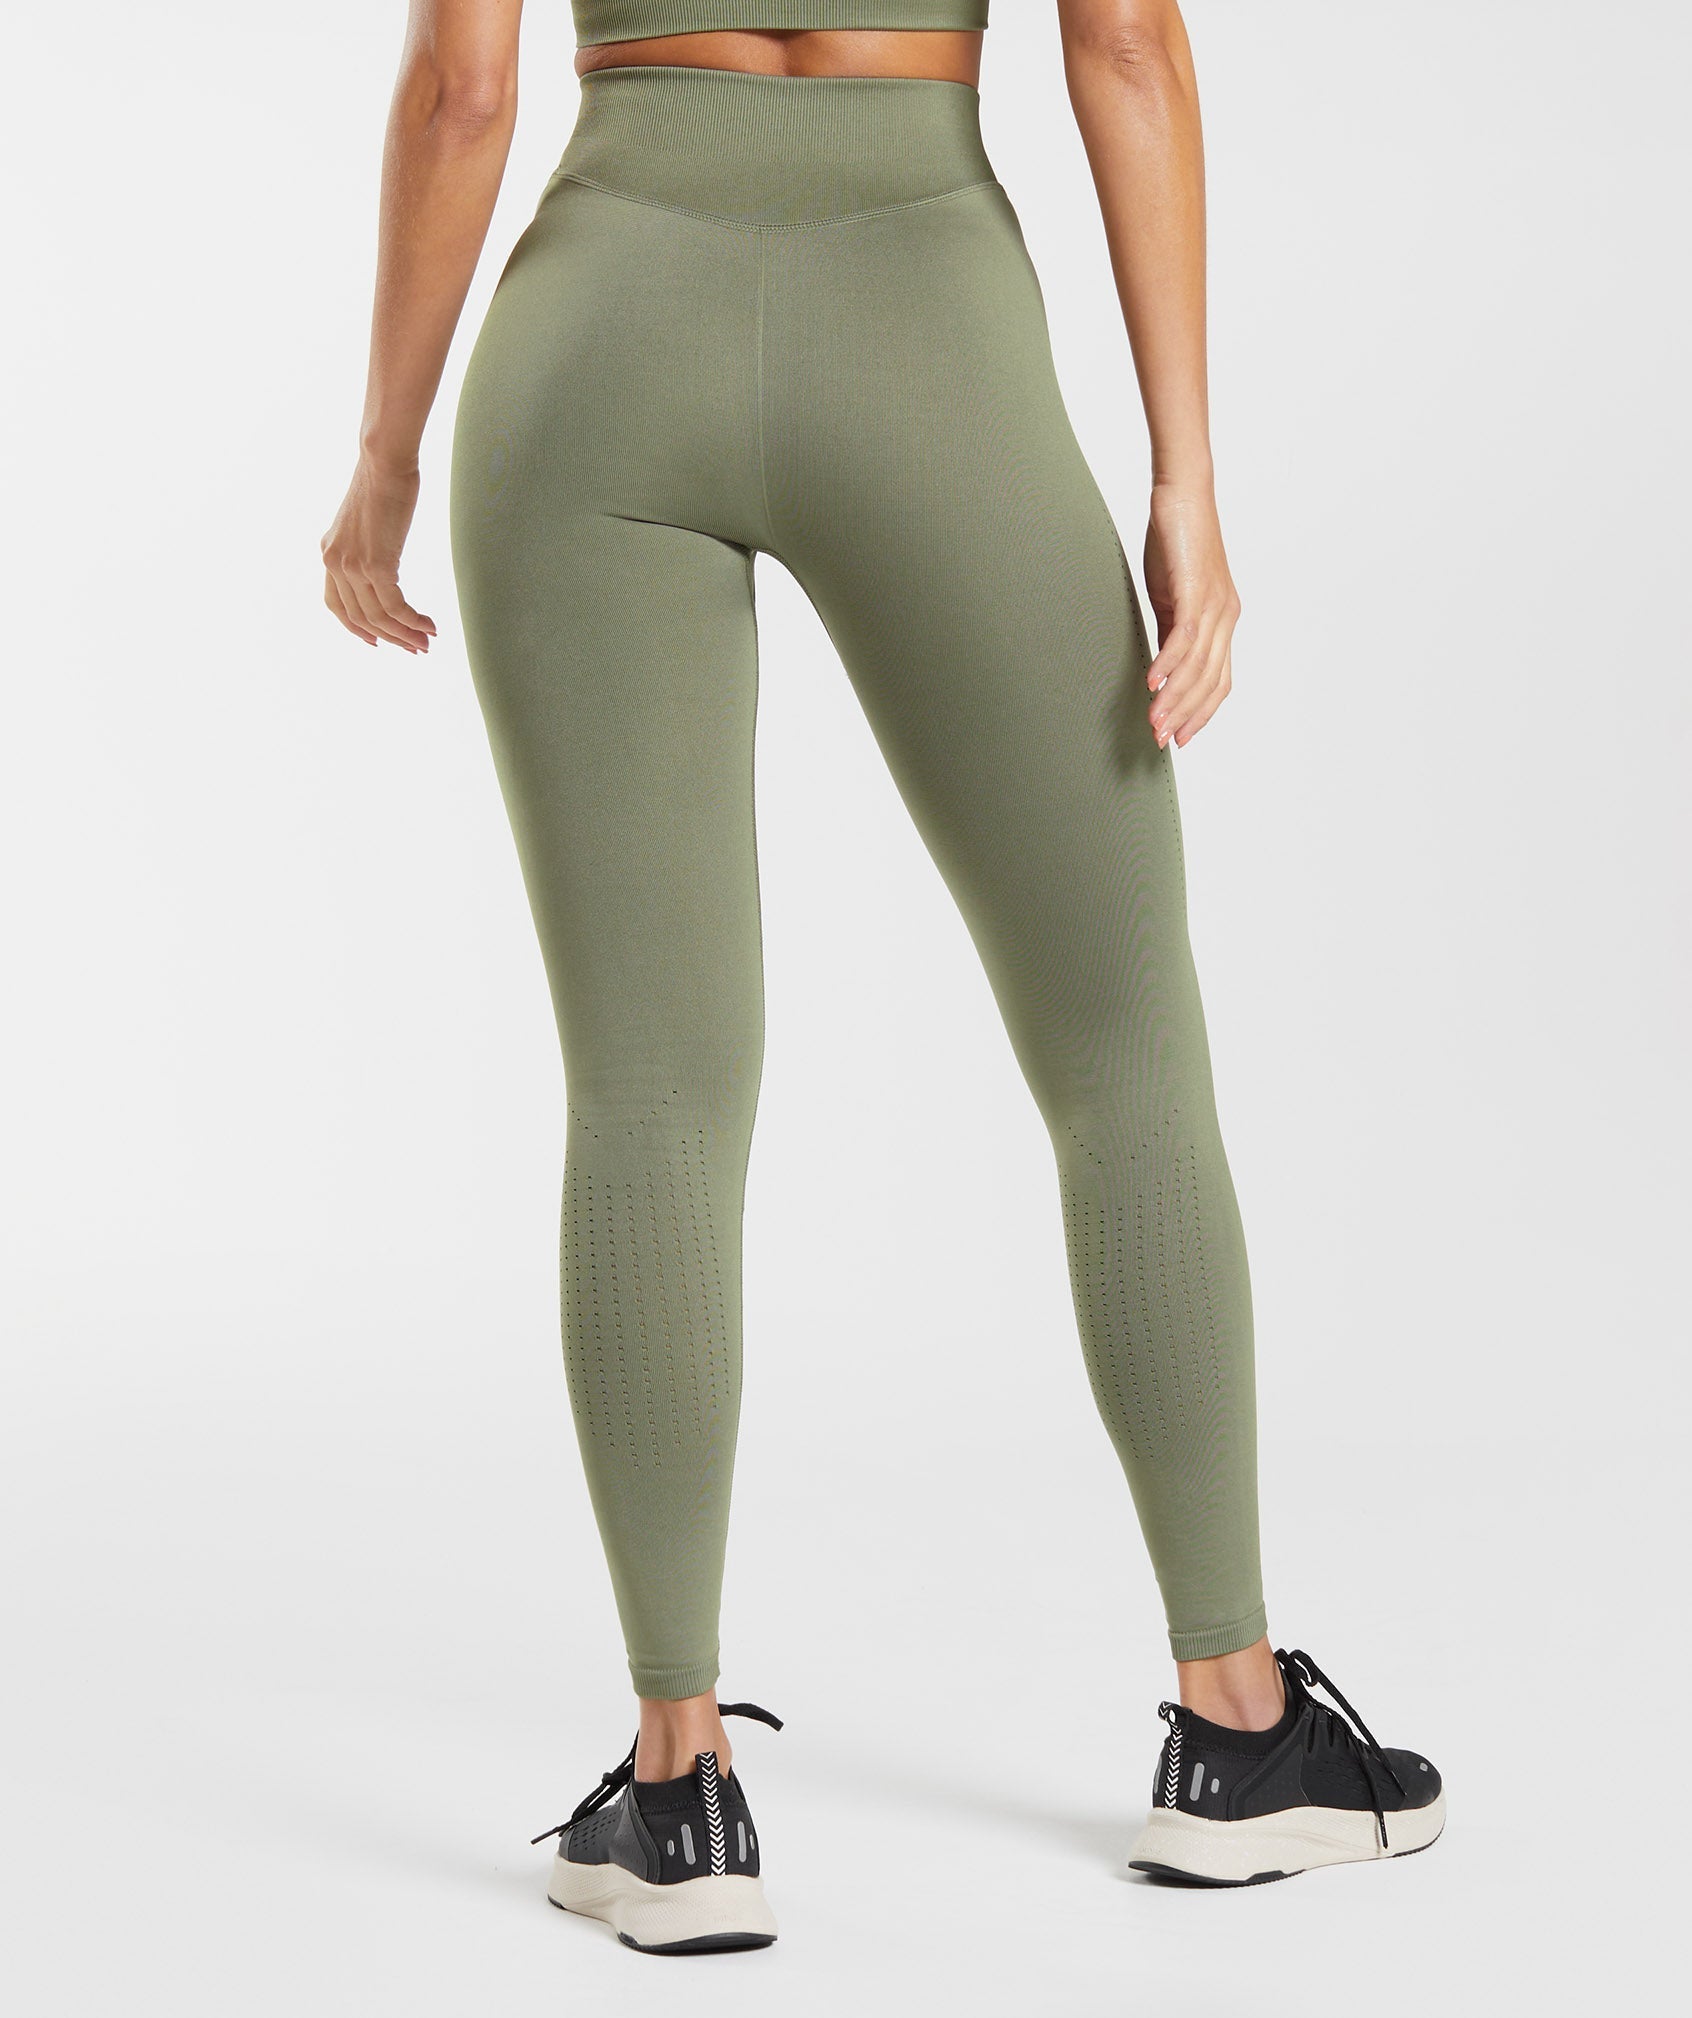 Sweat Seamless Leggings in Dusty Olive - view 2